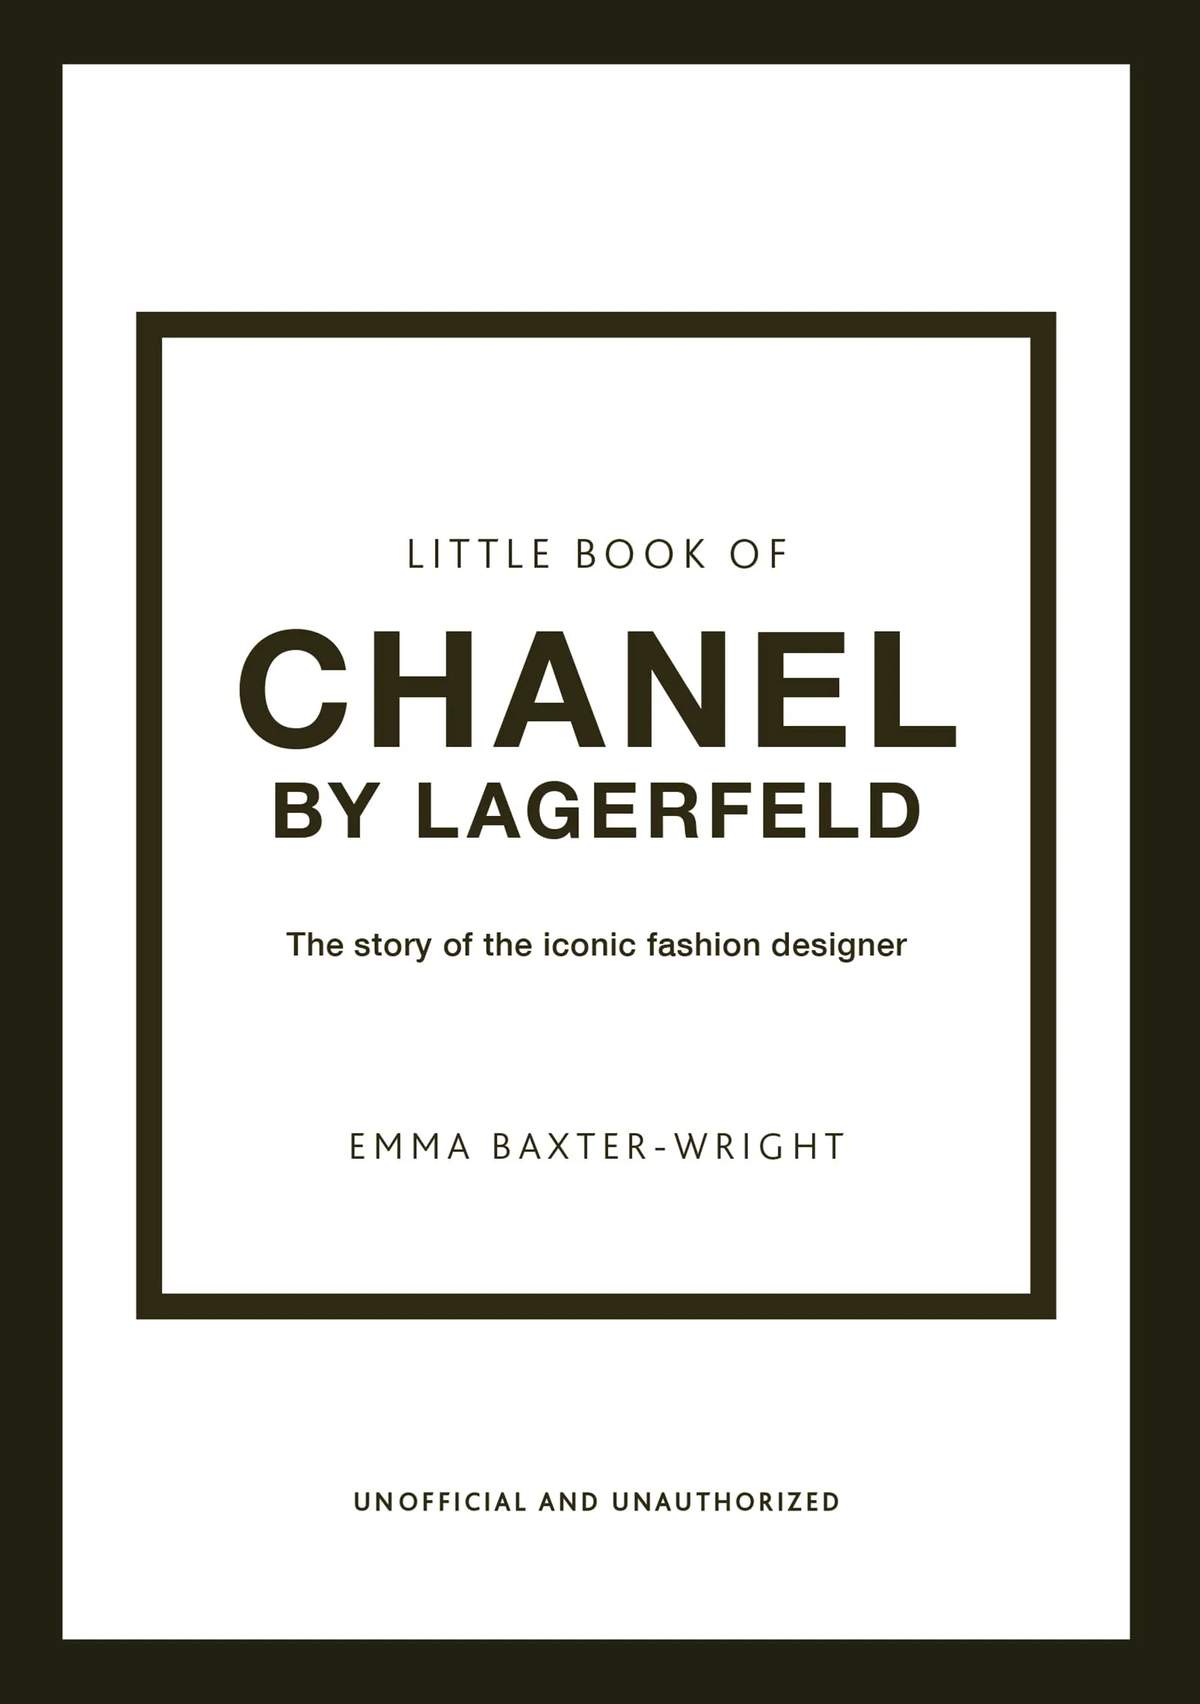 Modstand lokalisere skarp New Mags - Little Book of Chanel by Lagerfeld - Af Emma Baxter-Wright |  Imerco